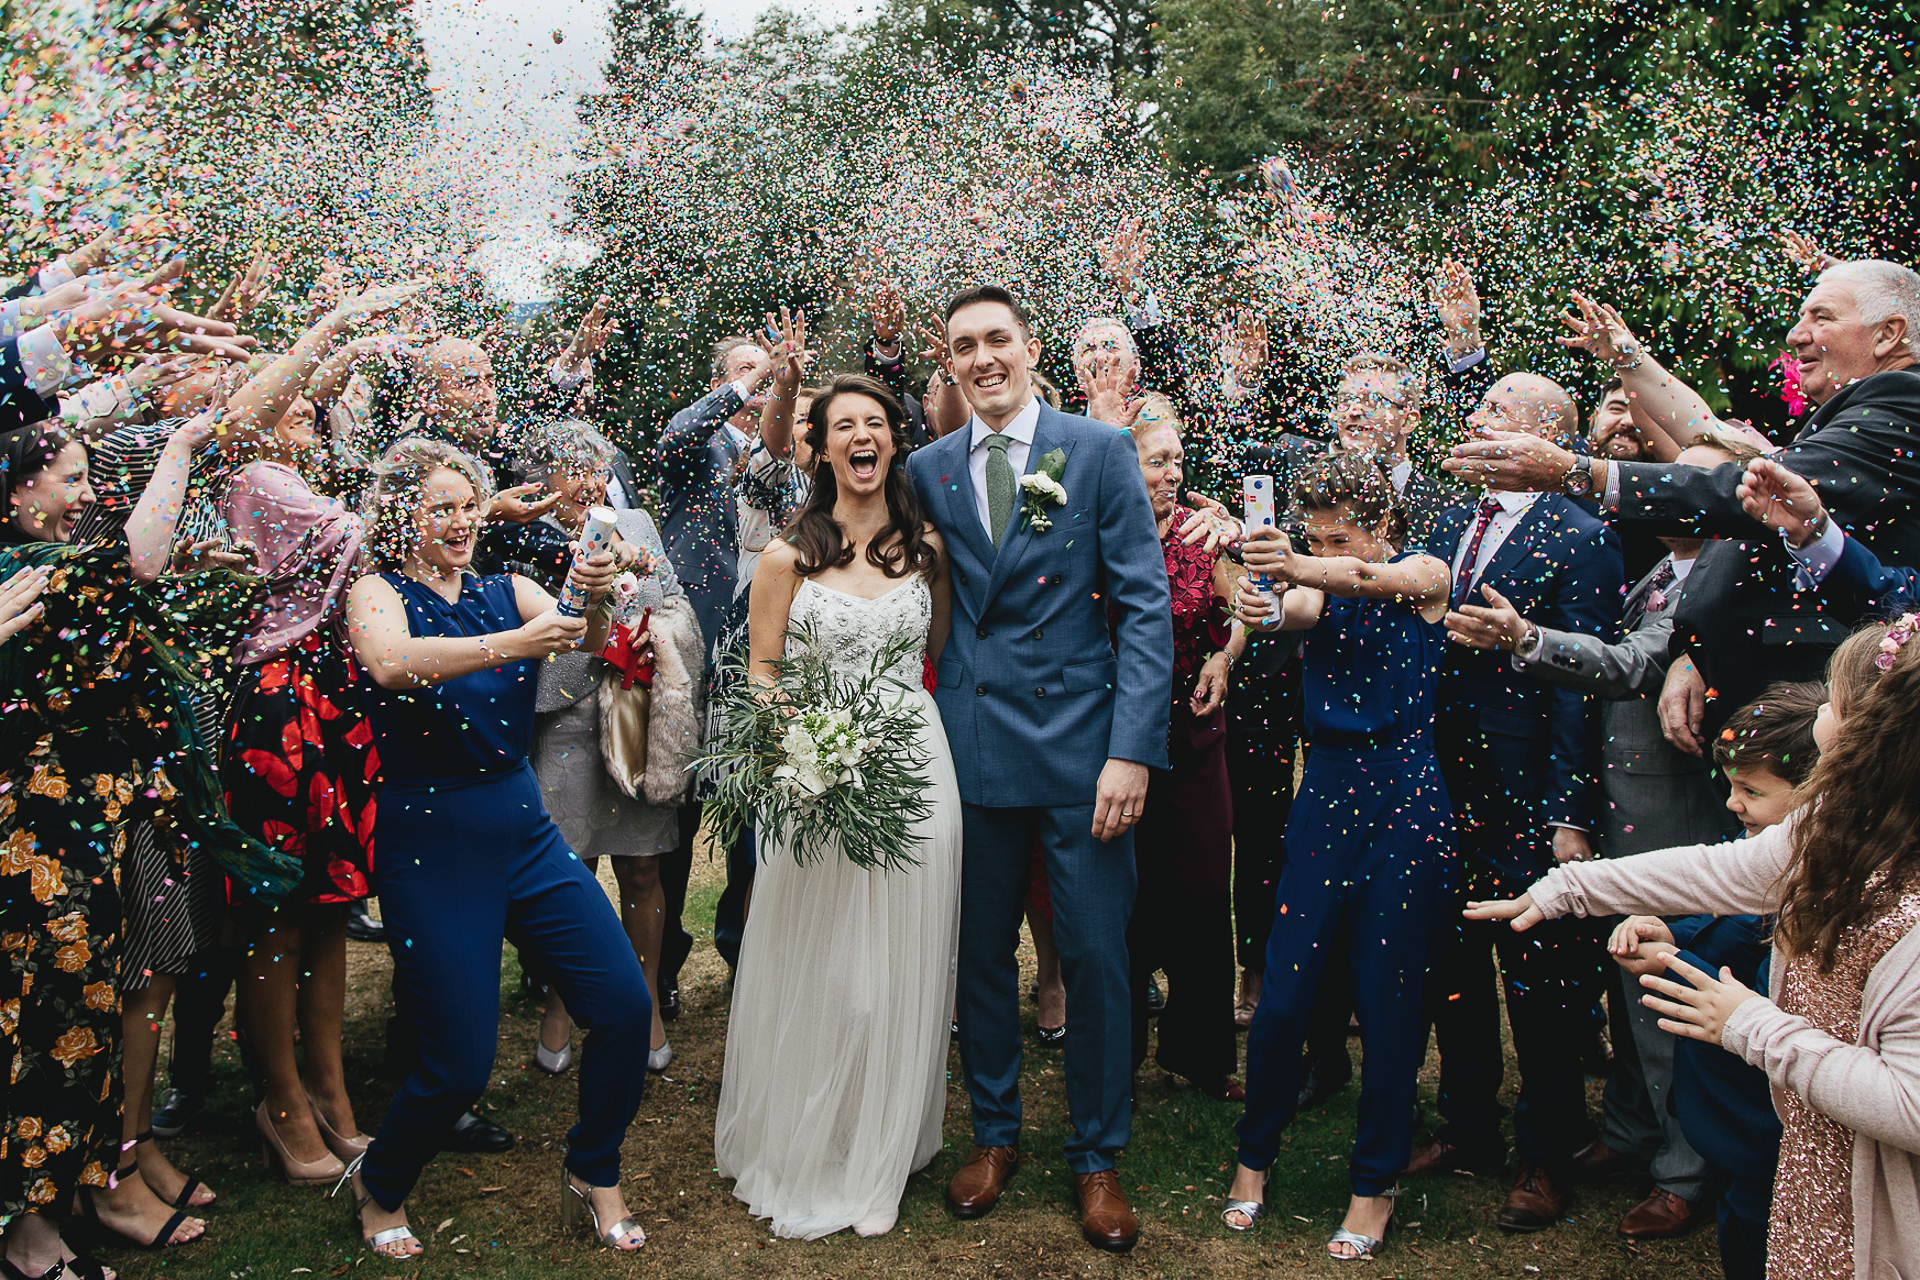 Bride and groom surrounded by wedding guests throwing confetti